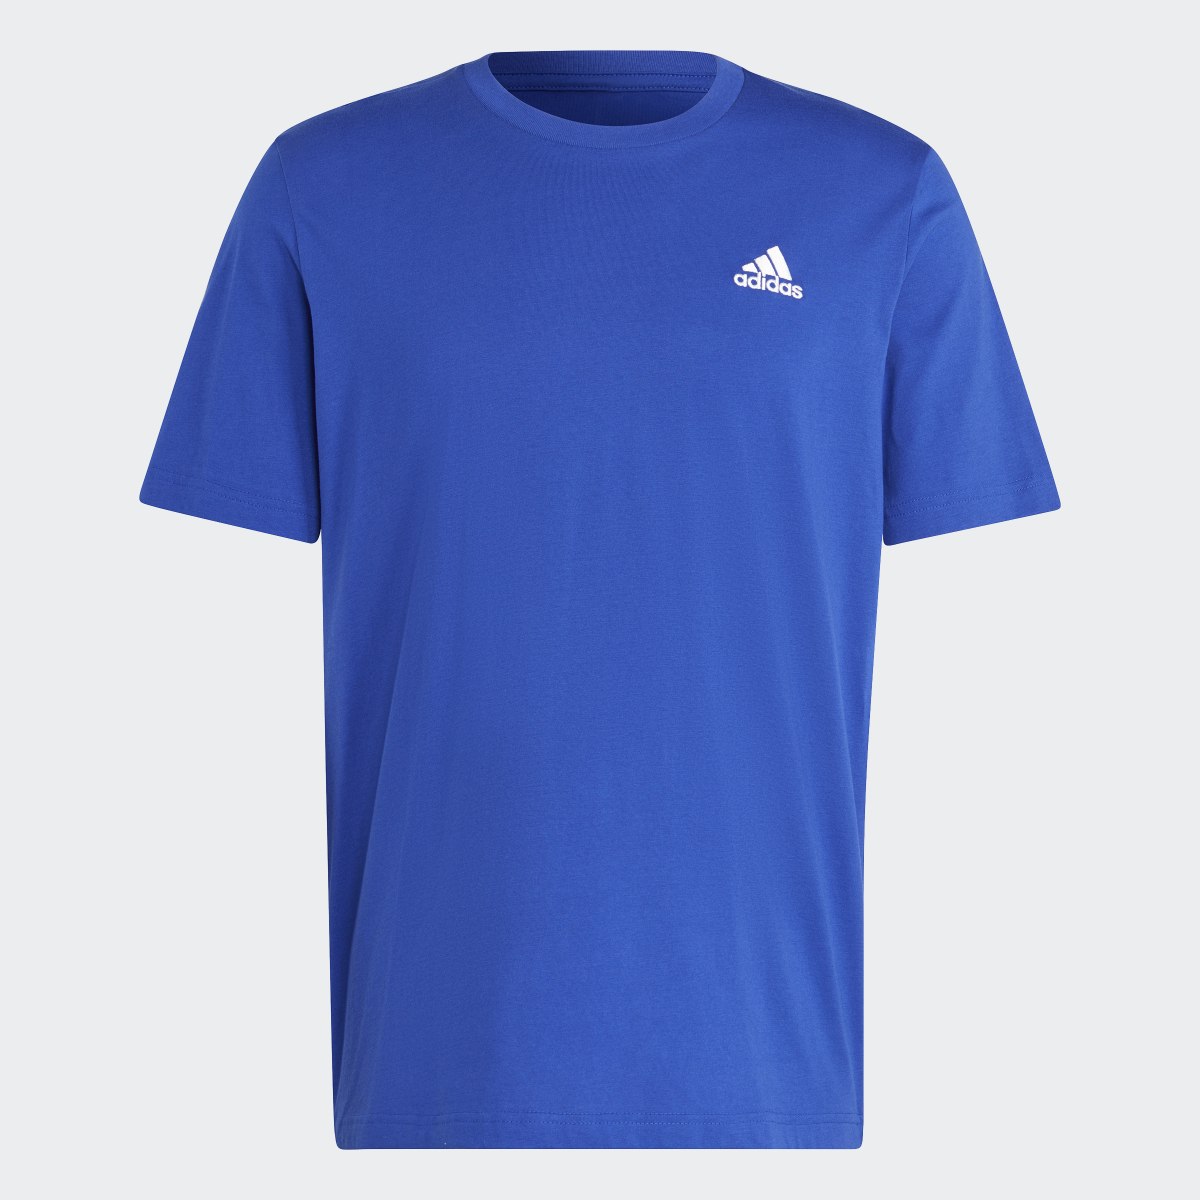 Adidas T-shirt Essentials Single Jersey Embroidered Small Logo. 5